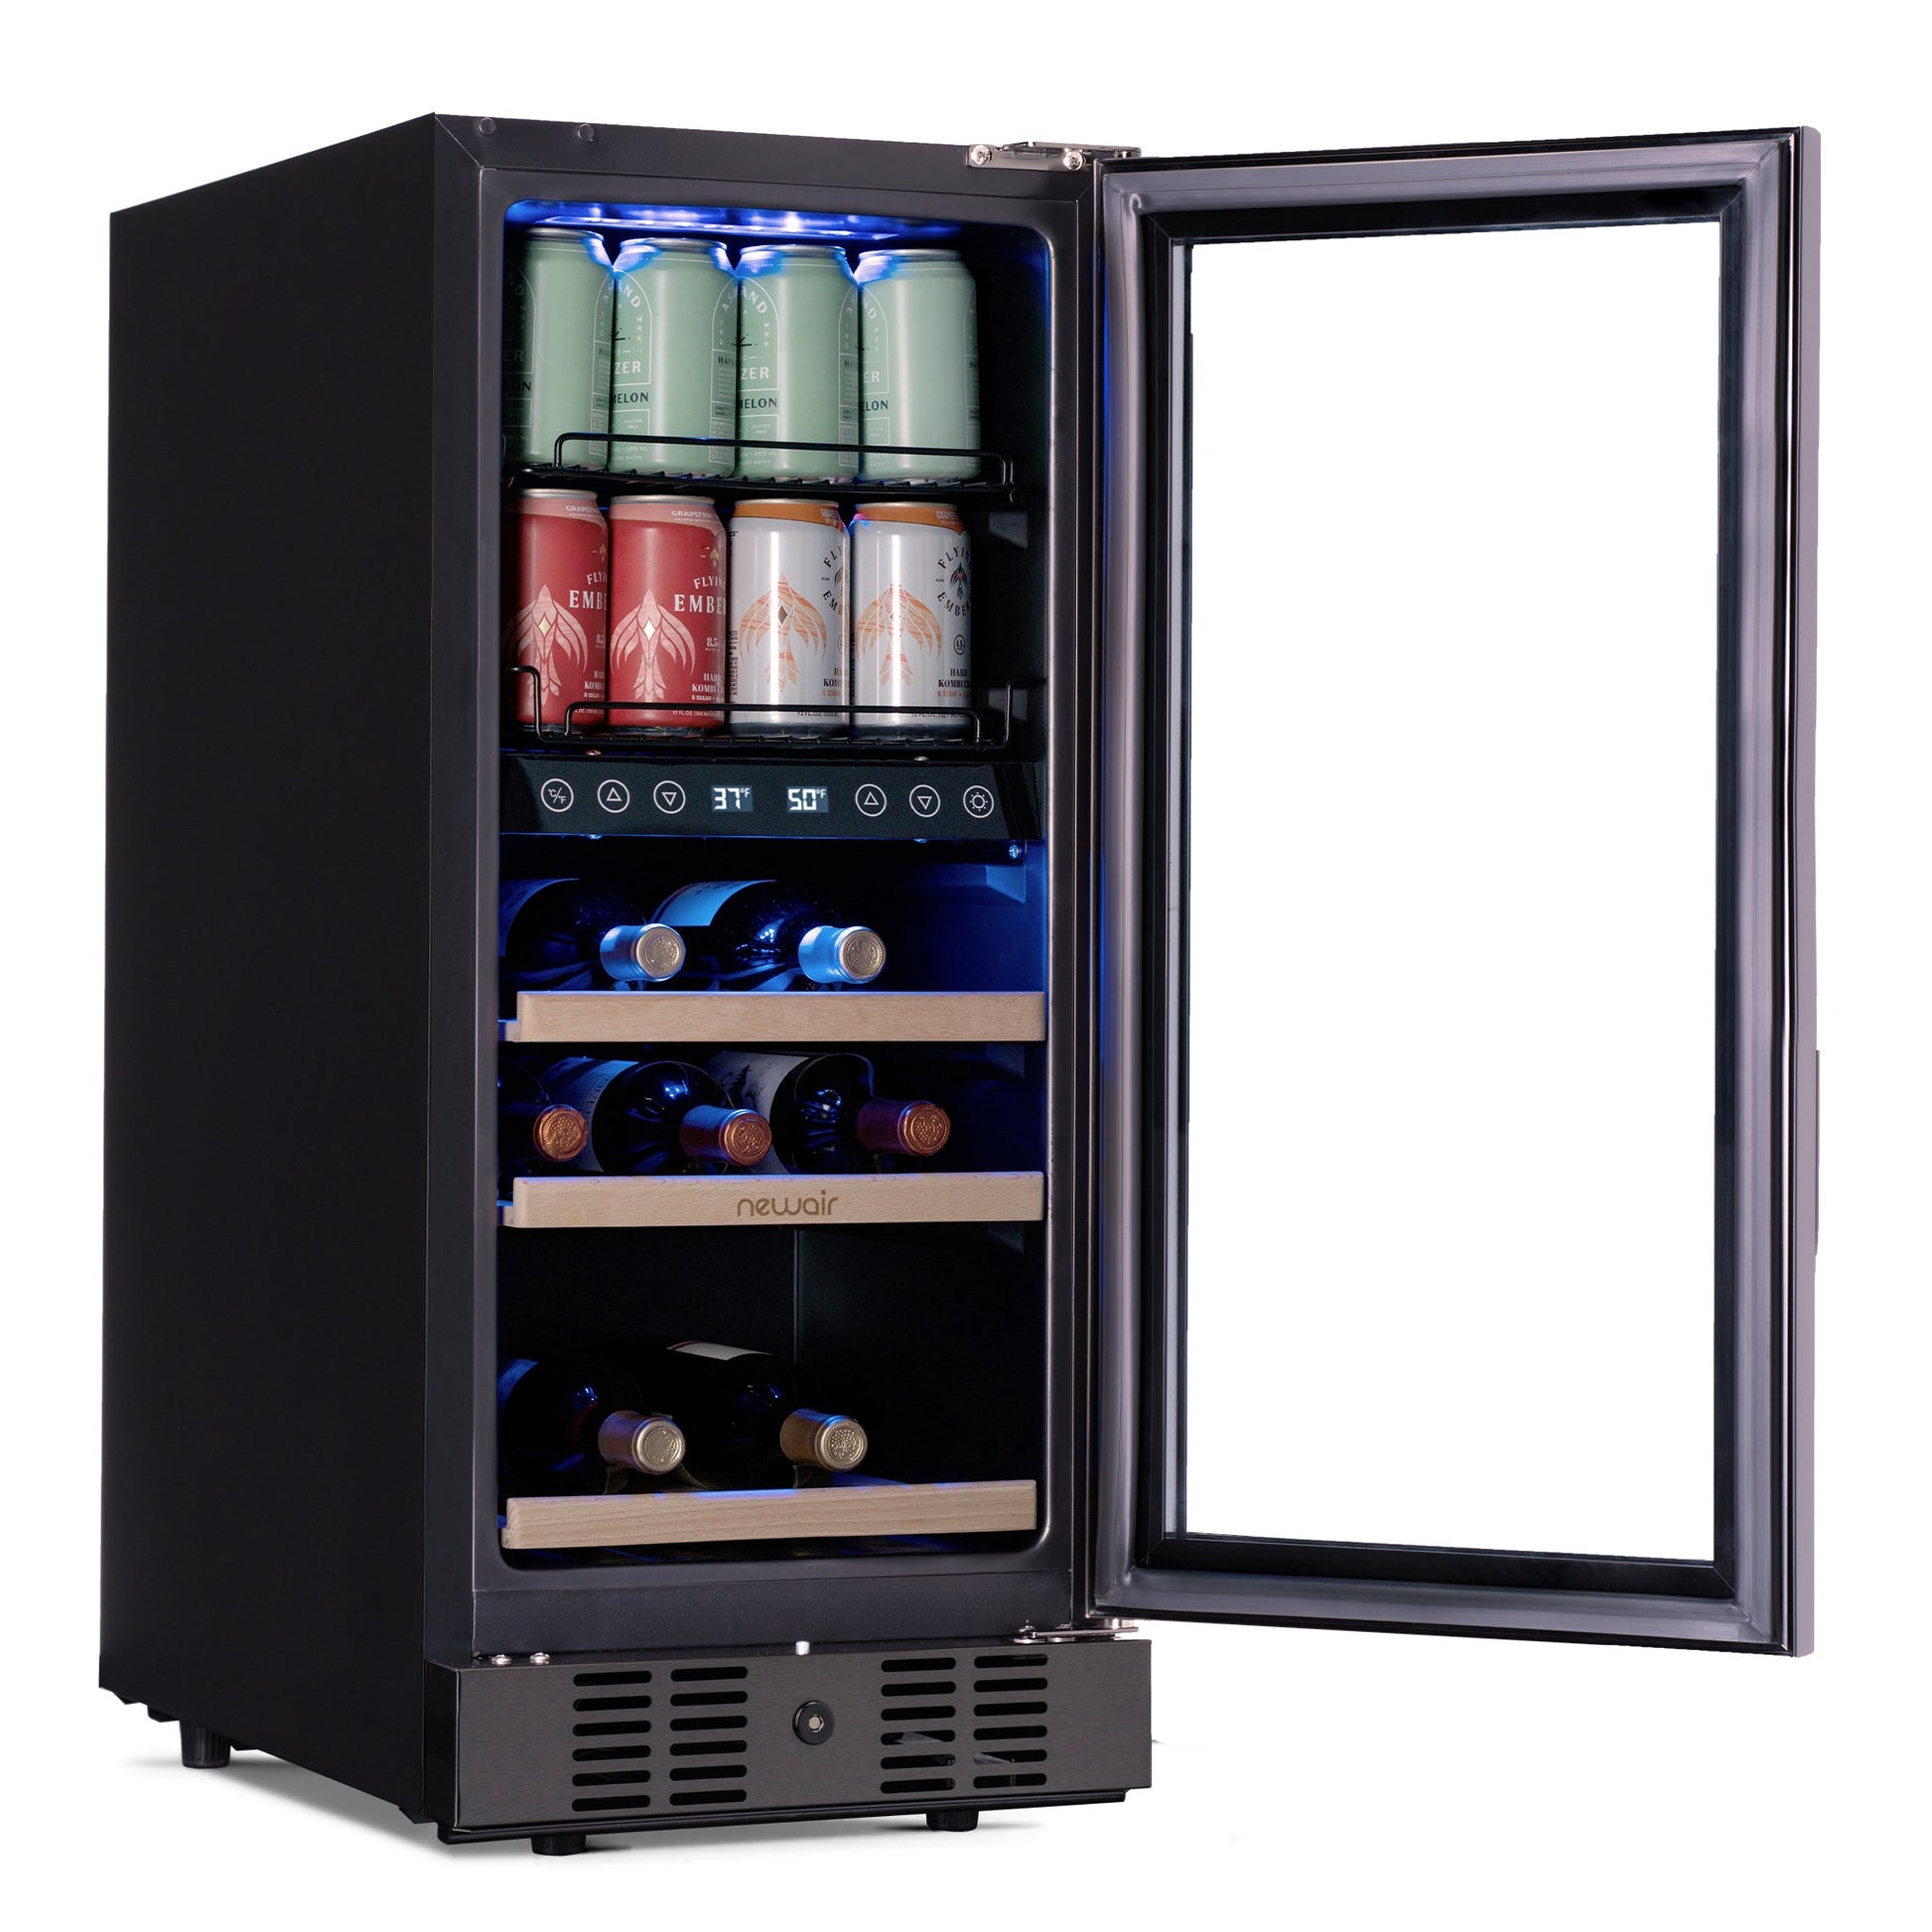 Newair 15 Inch Wine and Beverage Refrigerator – 13 Bottles & 48 Cans Capacity with Dual Temperature Zone Wine Cooler, Black Stainless Steel & Double-Layer Tempered Glass Door, Compact Wine Cellar Built-in Counter or Freestanding Fridge